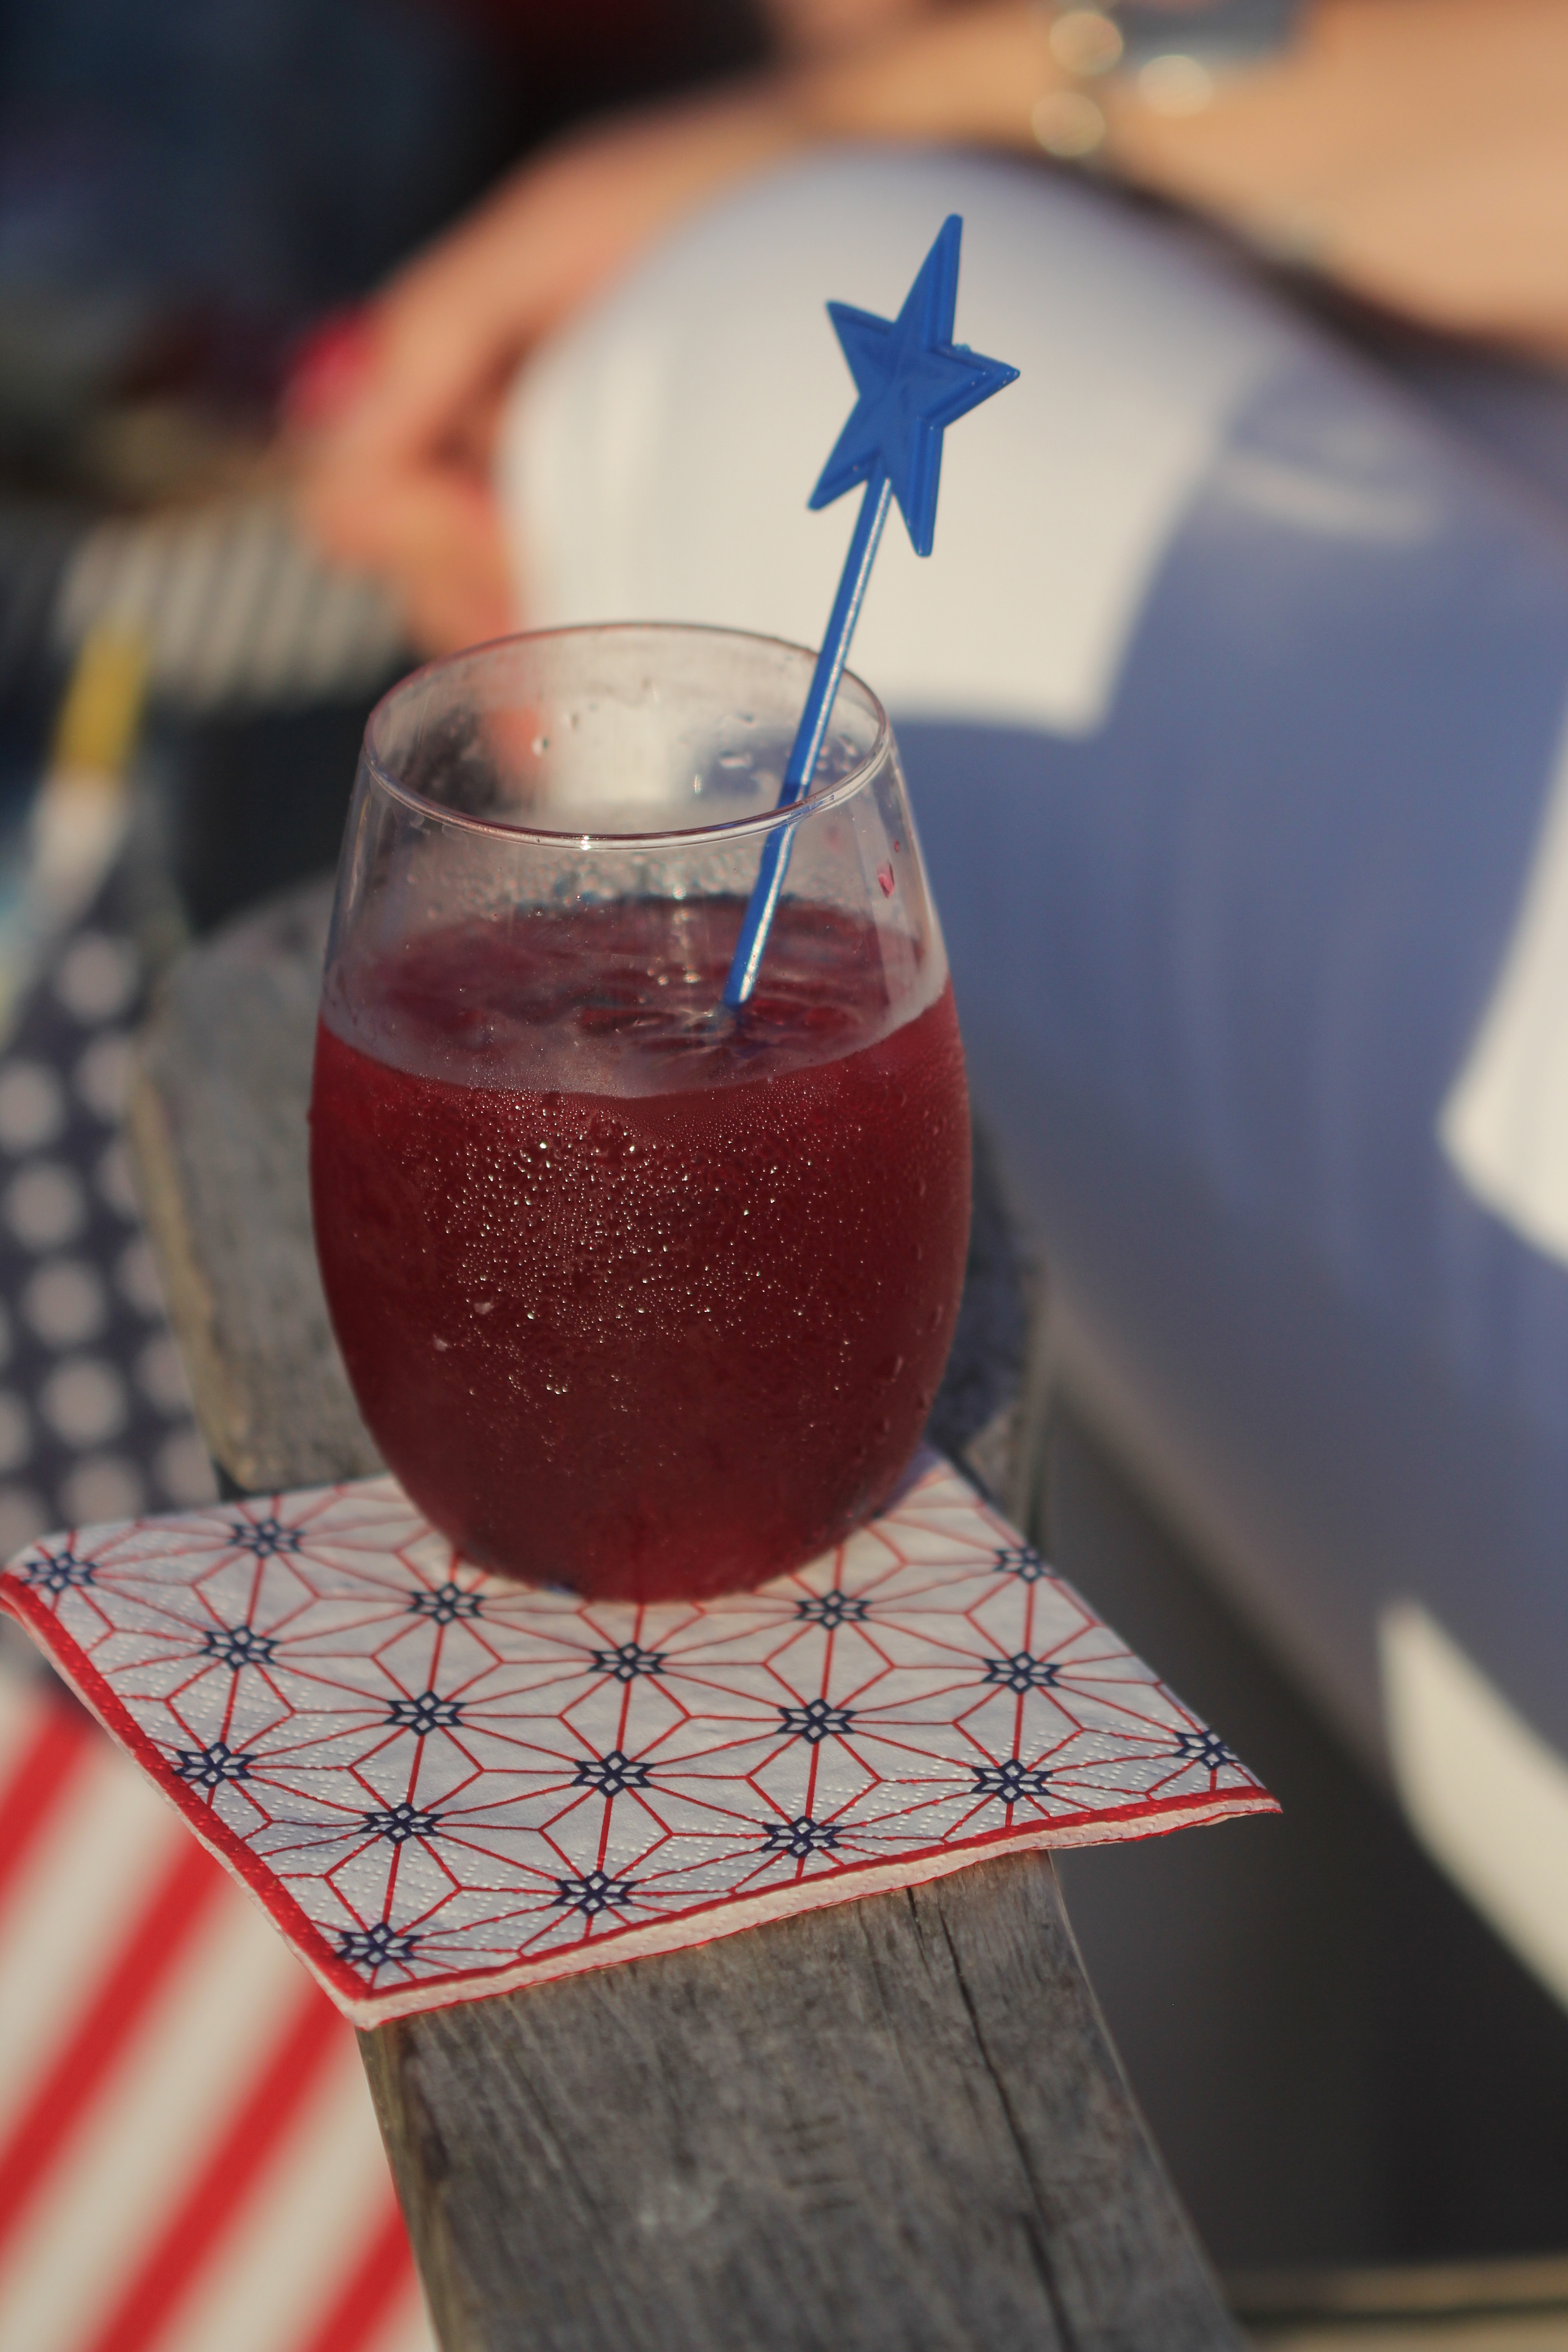 Serve up these fun Blueberry Limeade cocktails that taste delicious - looks festive and will quickly disappear! Get the recipe for your July 4th Party!